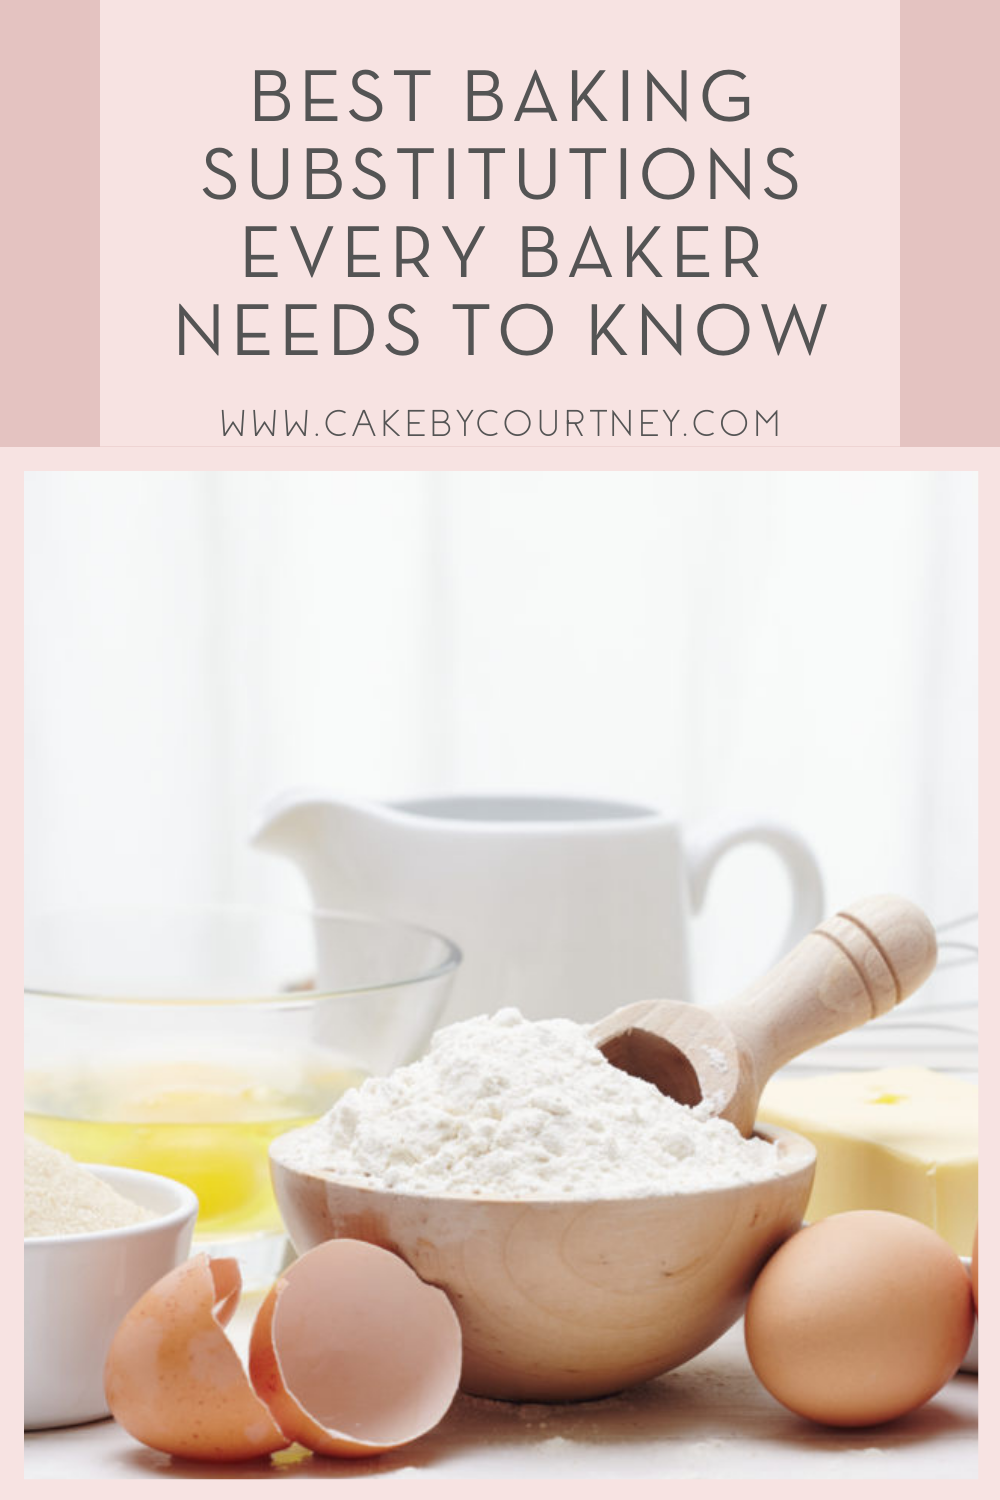 best baking substitutions to use when baking cake.  www.cakebycourtney.com